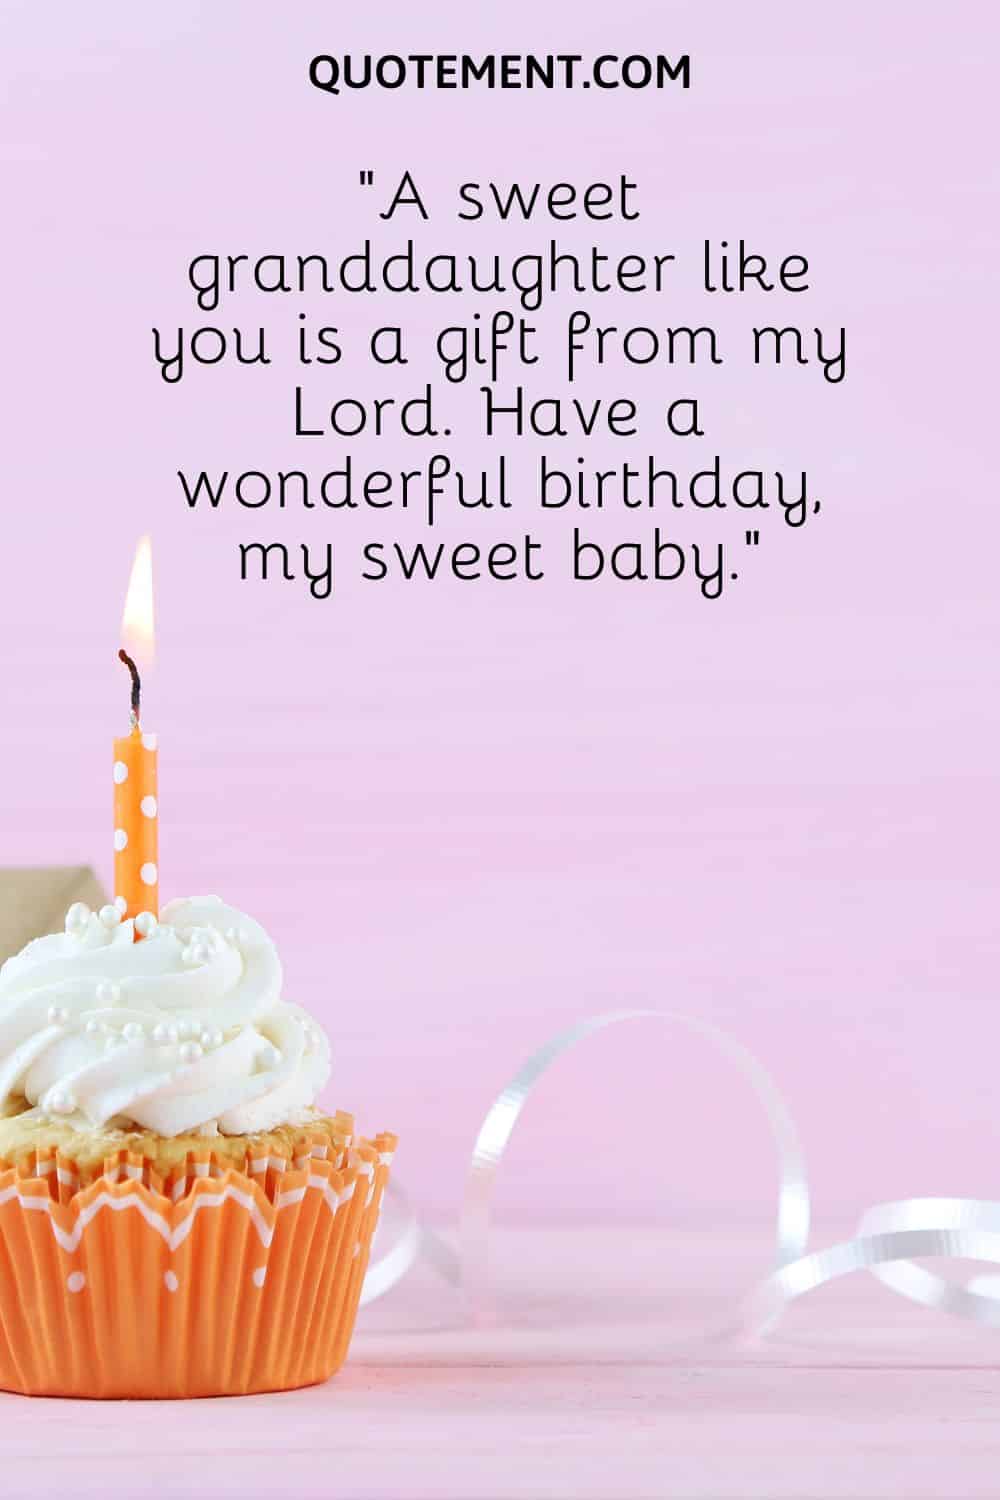 A sweet granddaughter like you is a gift from my Lord